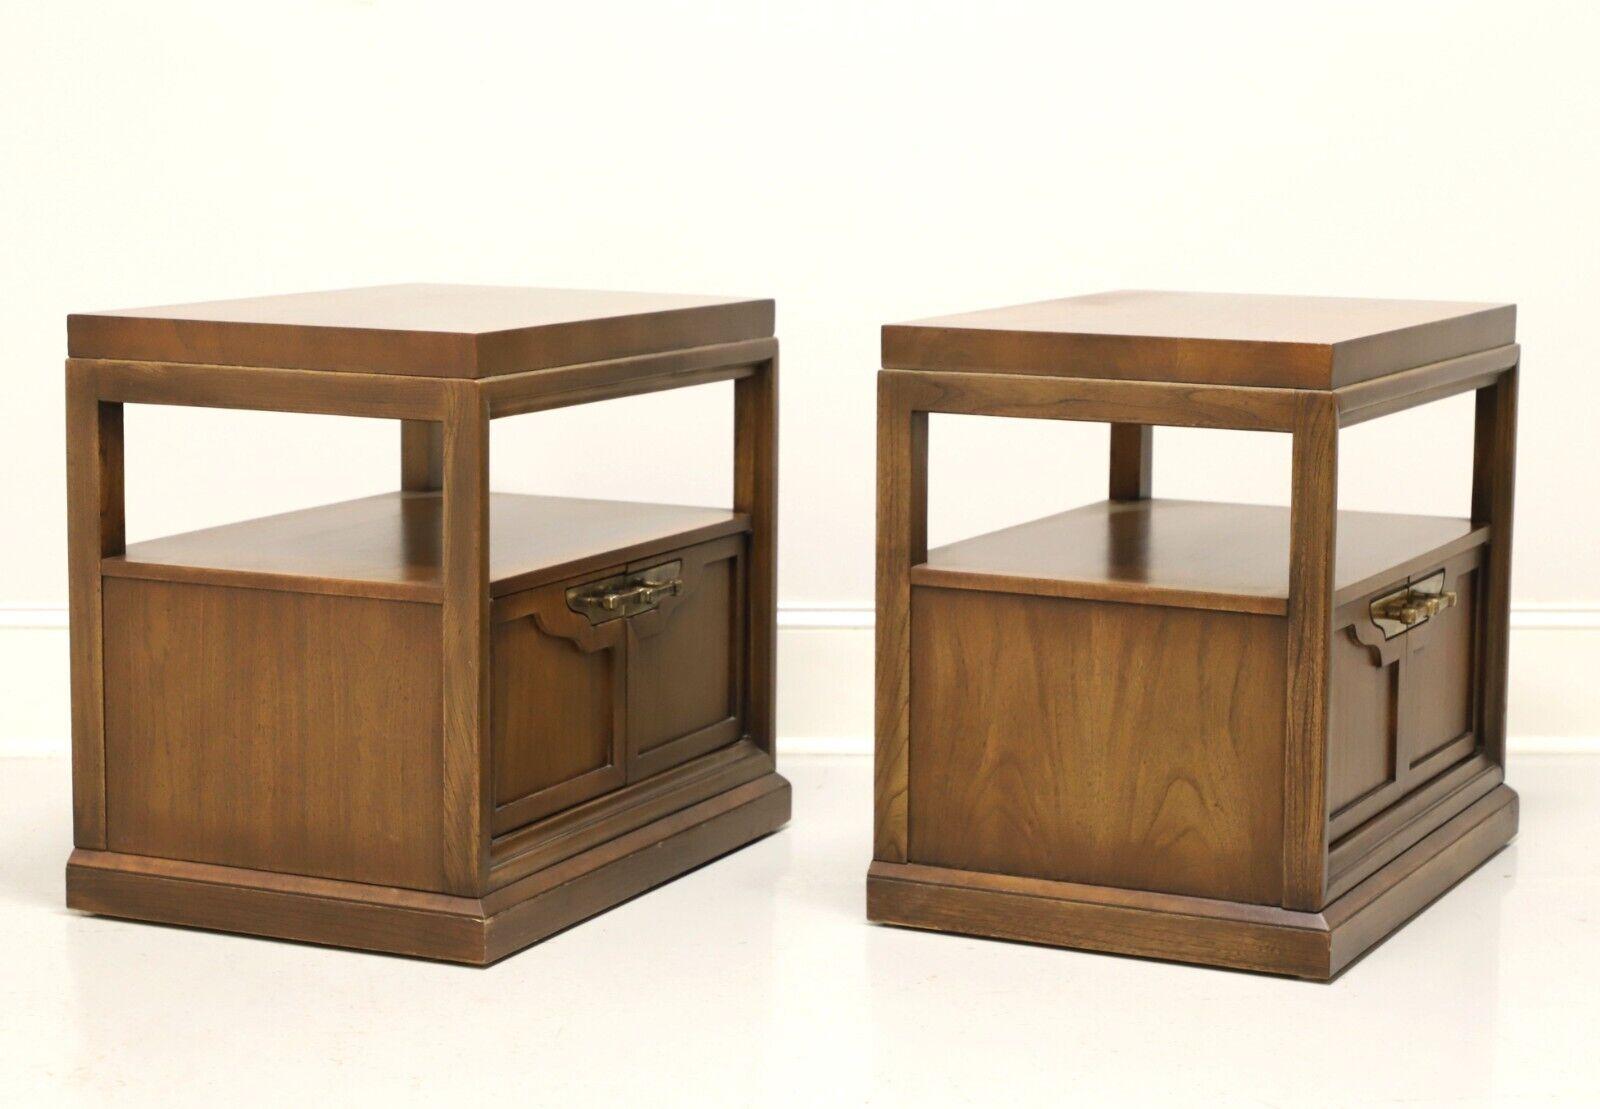 A pair of Neoclassical style nightstands by Fancher Furniture. Walnut with an inlaid  parquetry design to top and brass hardware. Features an one shelf area over a two door cabinet revealing a storage area. Made in Salamanca, New York, USA, circa